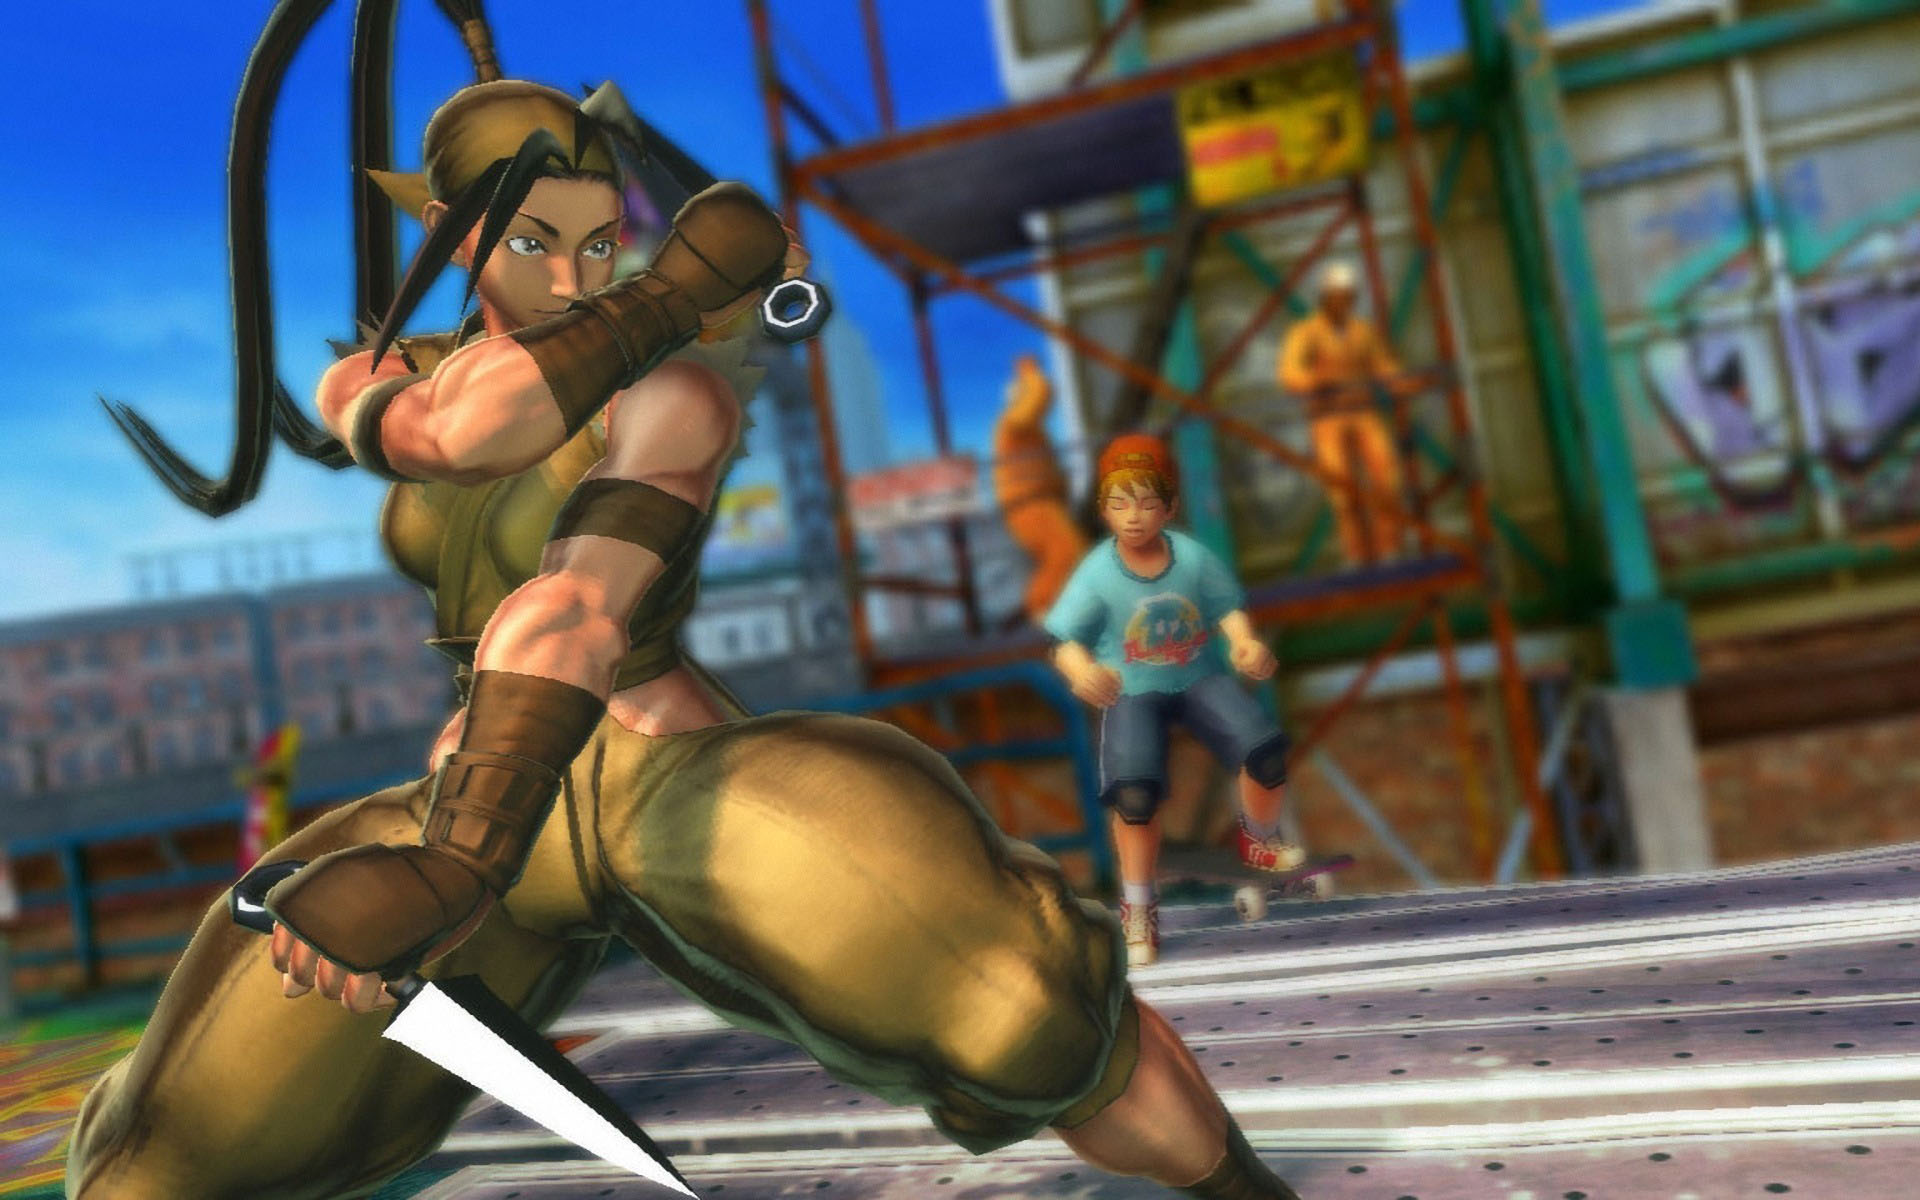 Ibuki from the Street Fighter Series